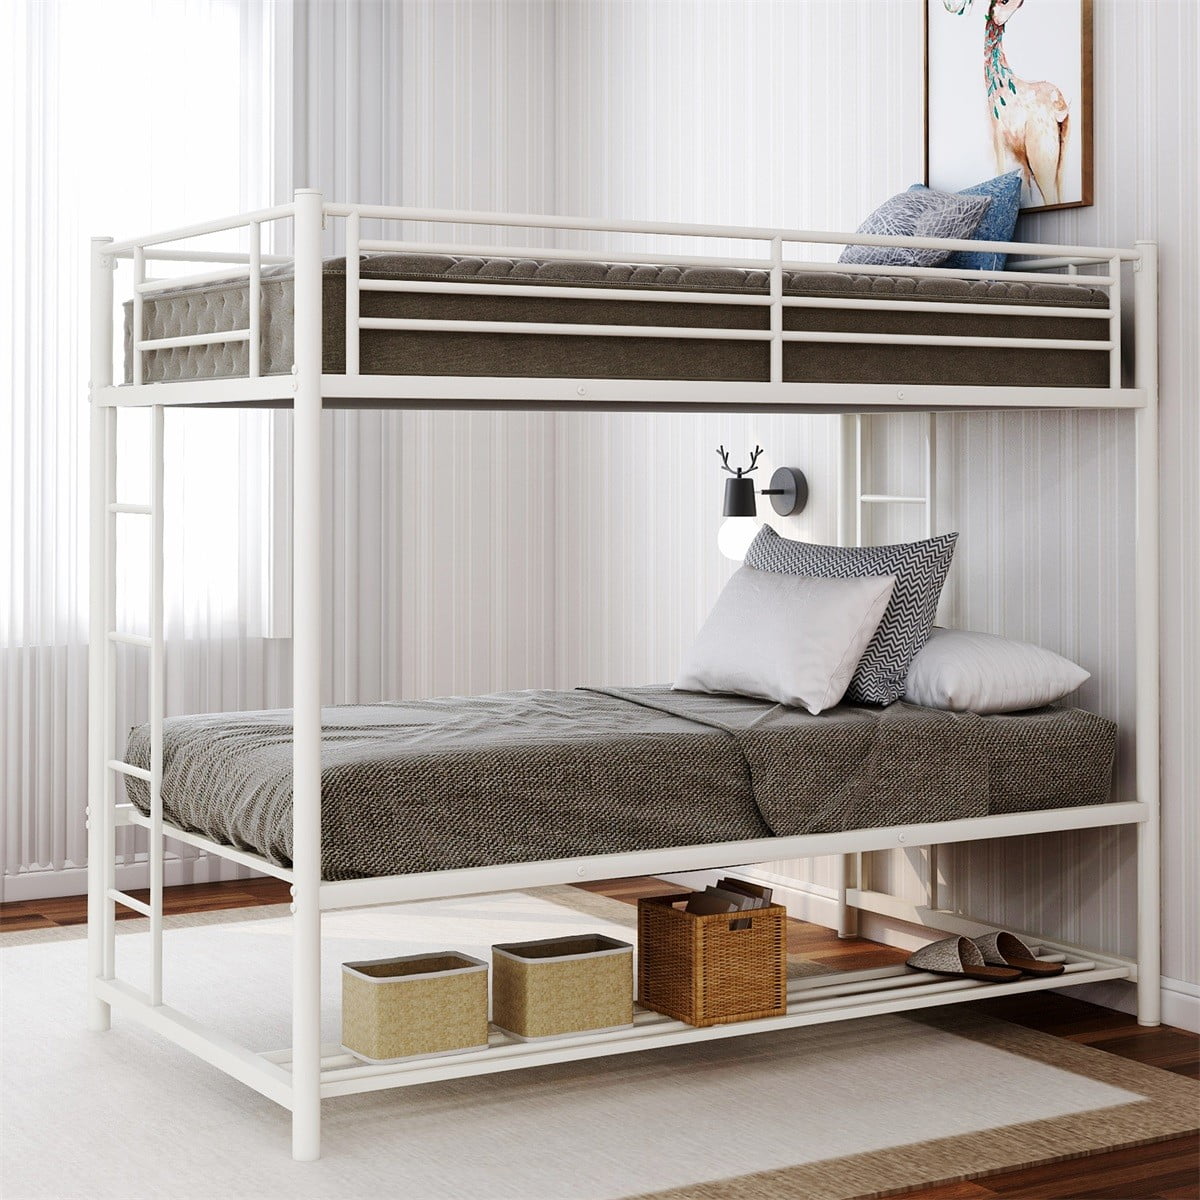 Modernluxe Metal Twin Over Bunk, Metal Bunk Bed With Storage